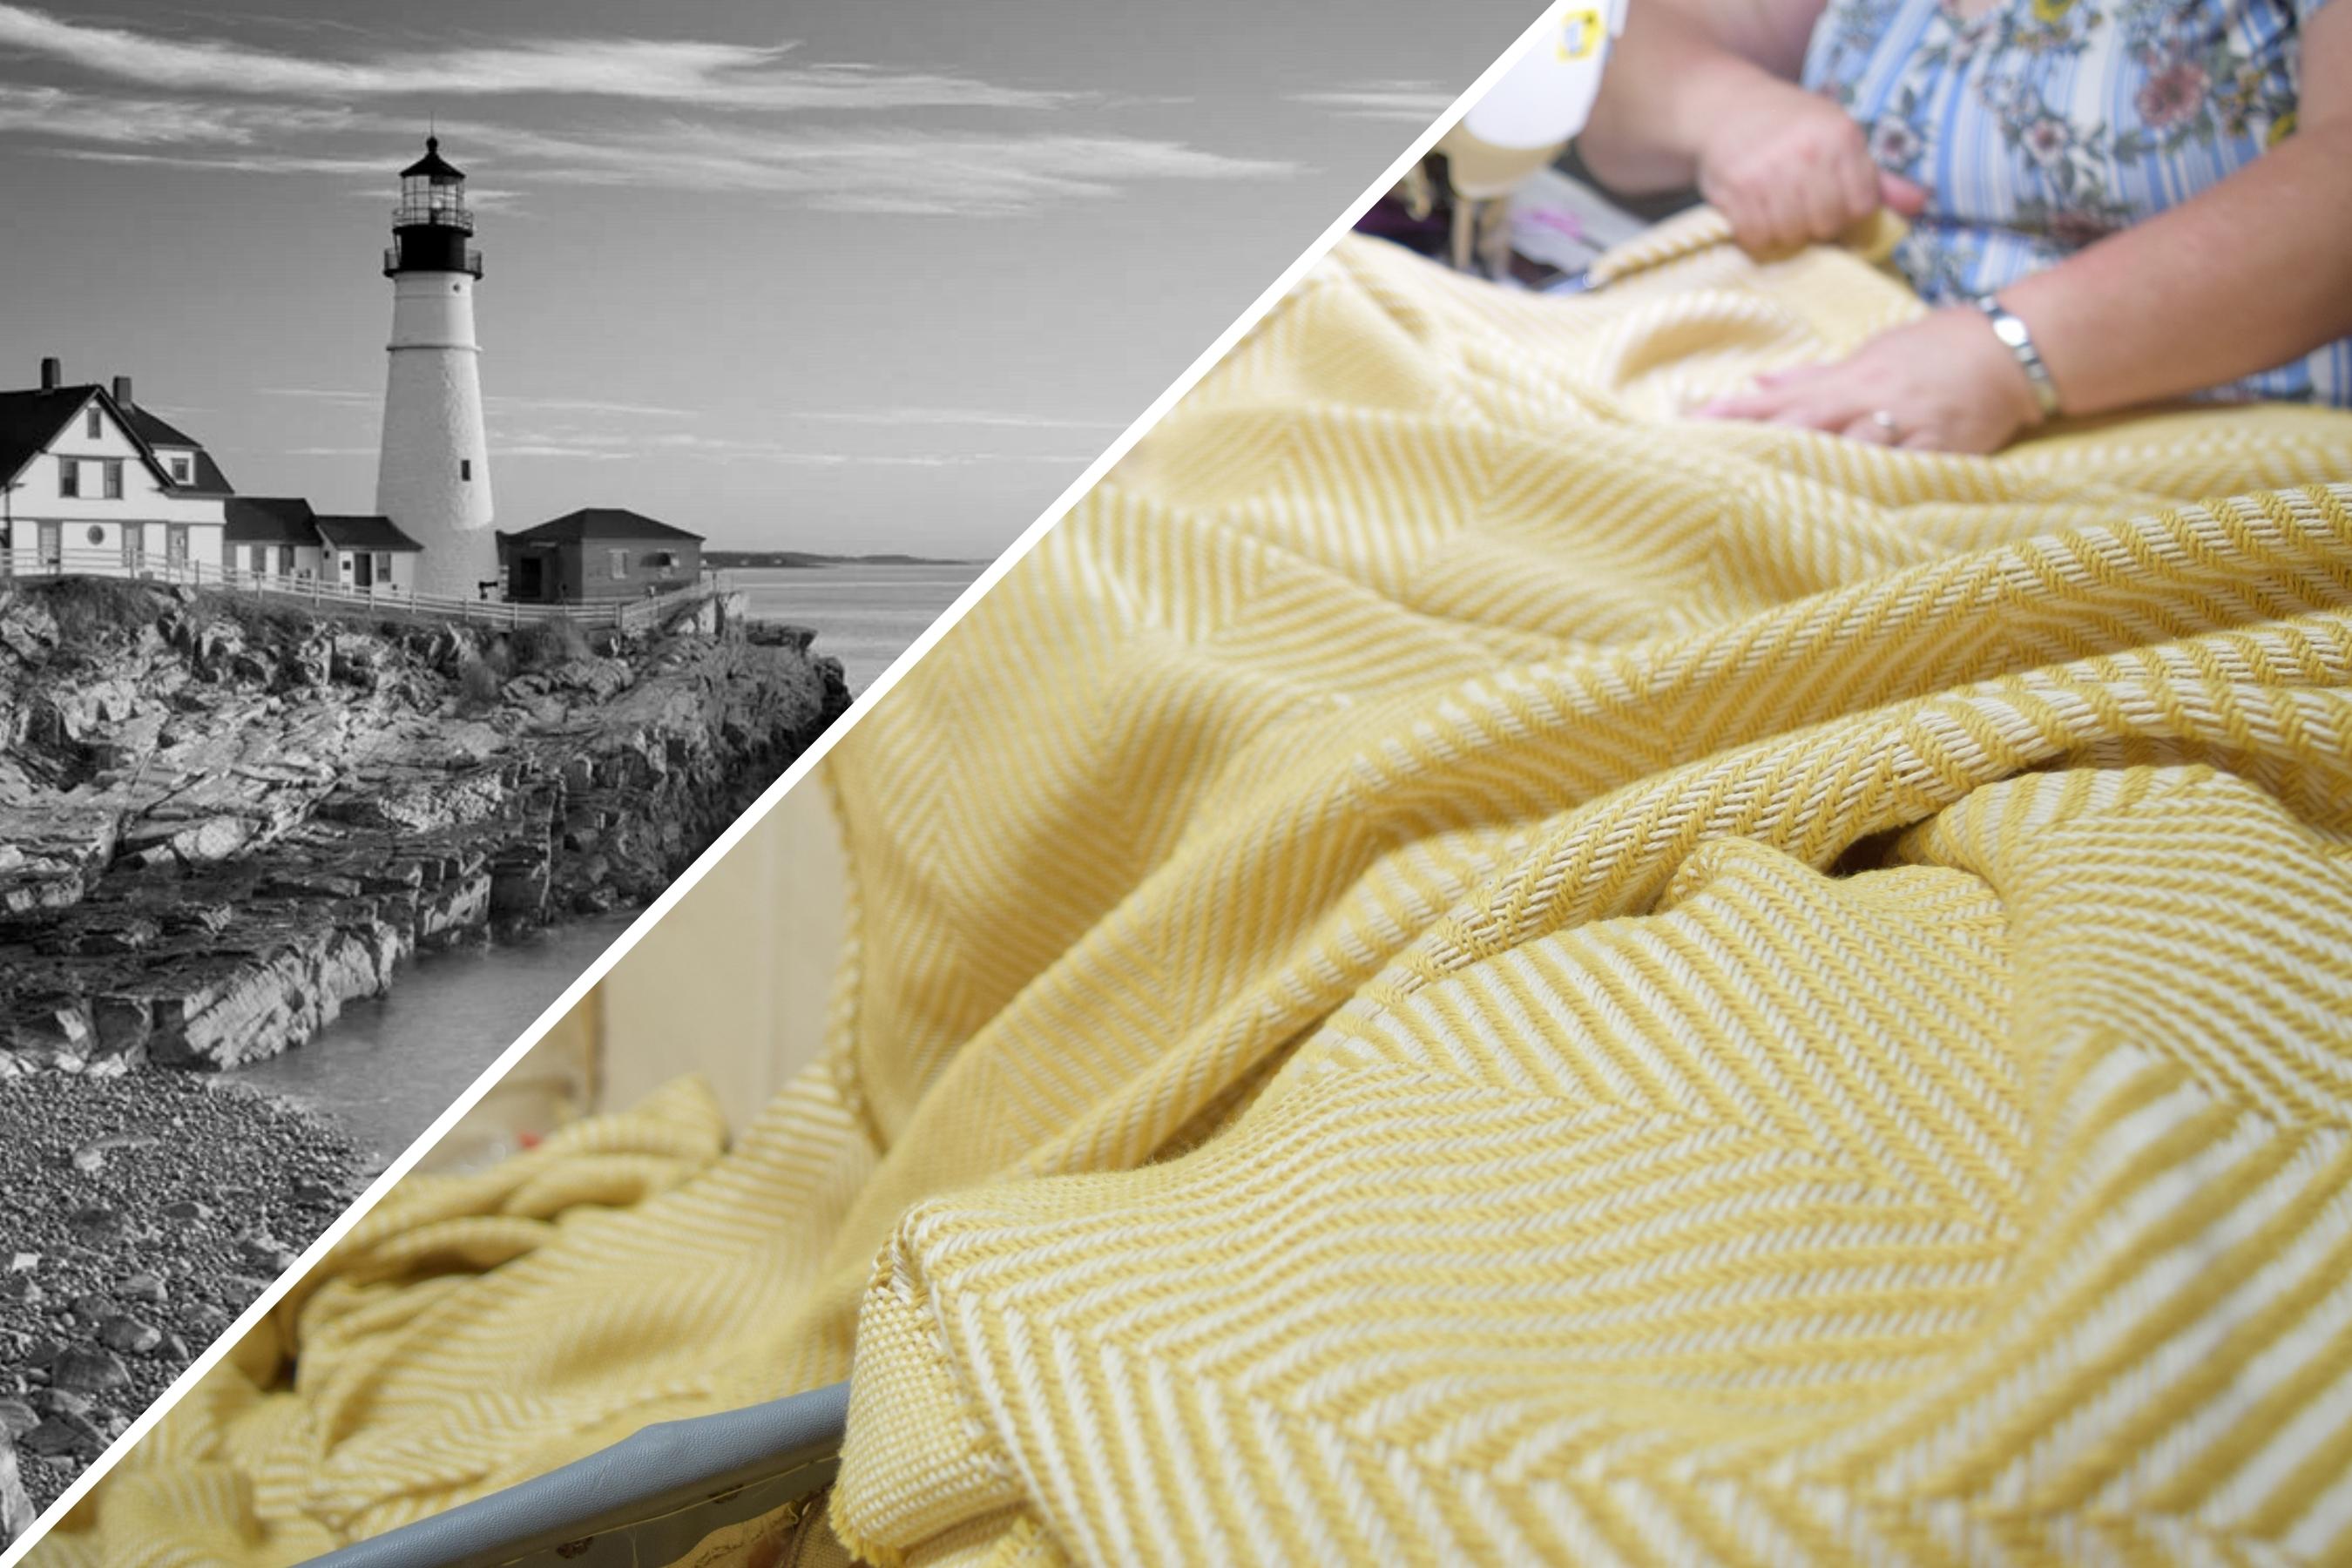 Weaving the finest blankets in Maine